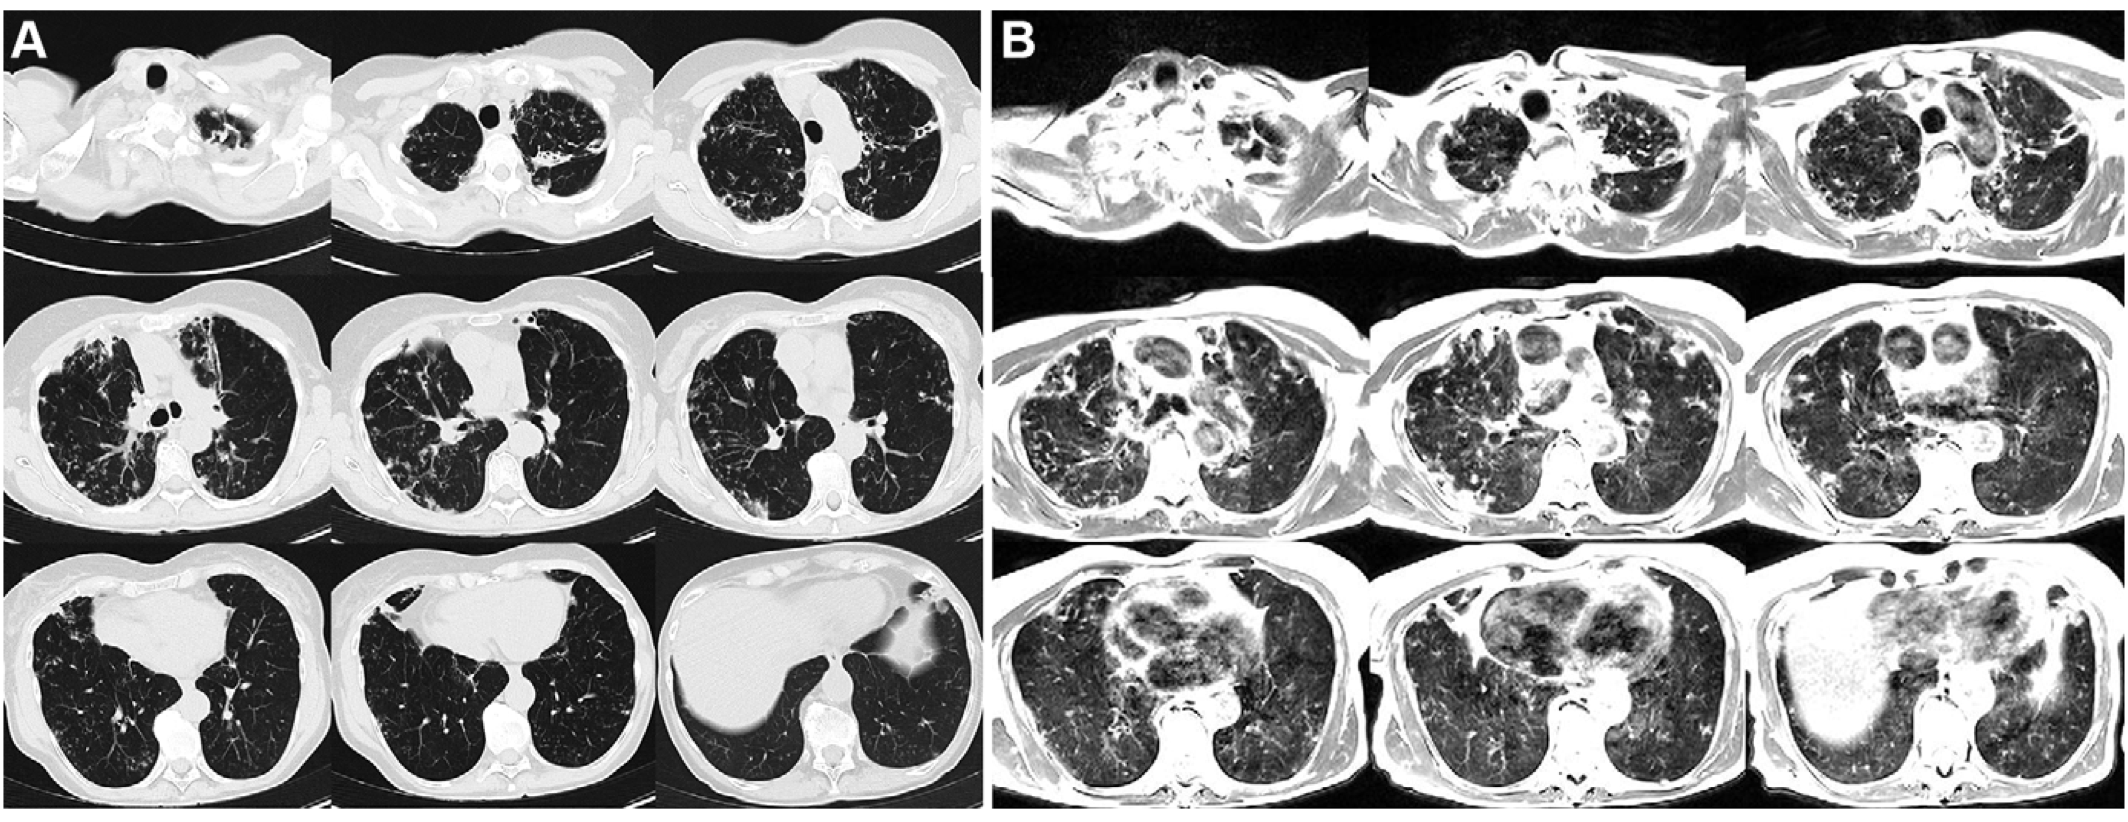 Axial multi-section imaging yielded full lung coverage using (A) CT (reformatted to 0.8 × 0.8 × 6 mm) and (B) T2-weighted MRI (1.1 × 1.1 × 6 mm) in a 69-year-old woman with bronchiectasis, cavitary lesions, and scattered pulmonary nodules.

Credit: RSNA